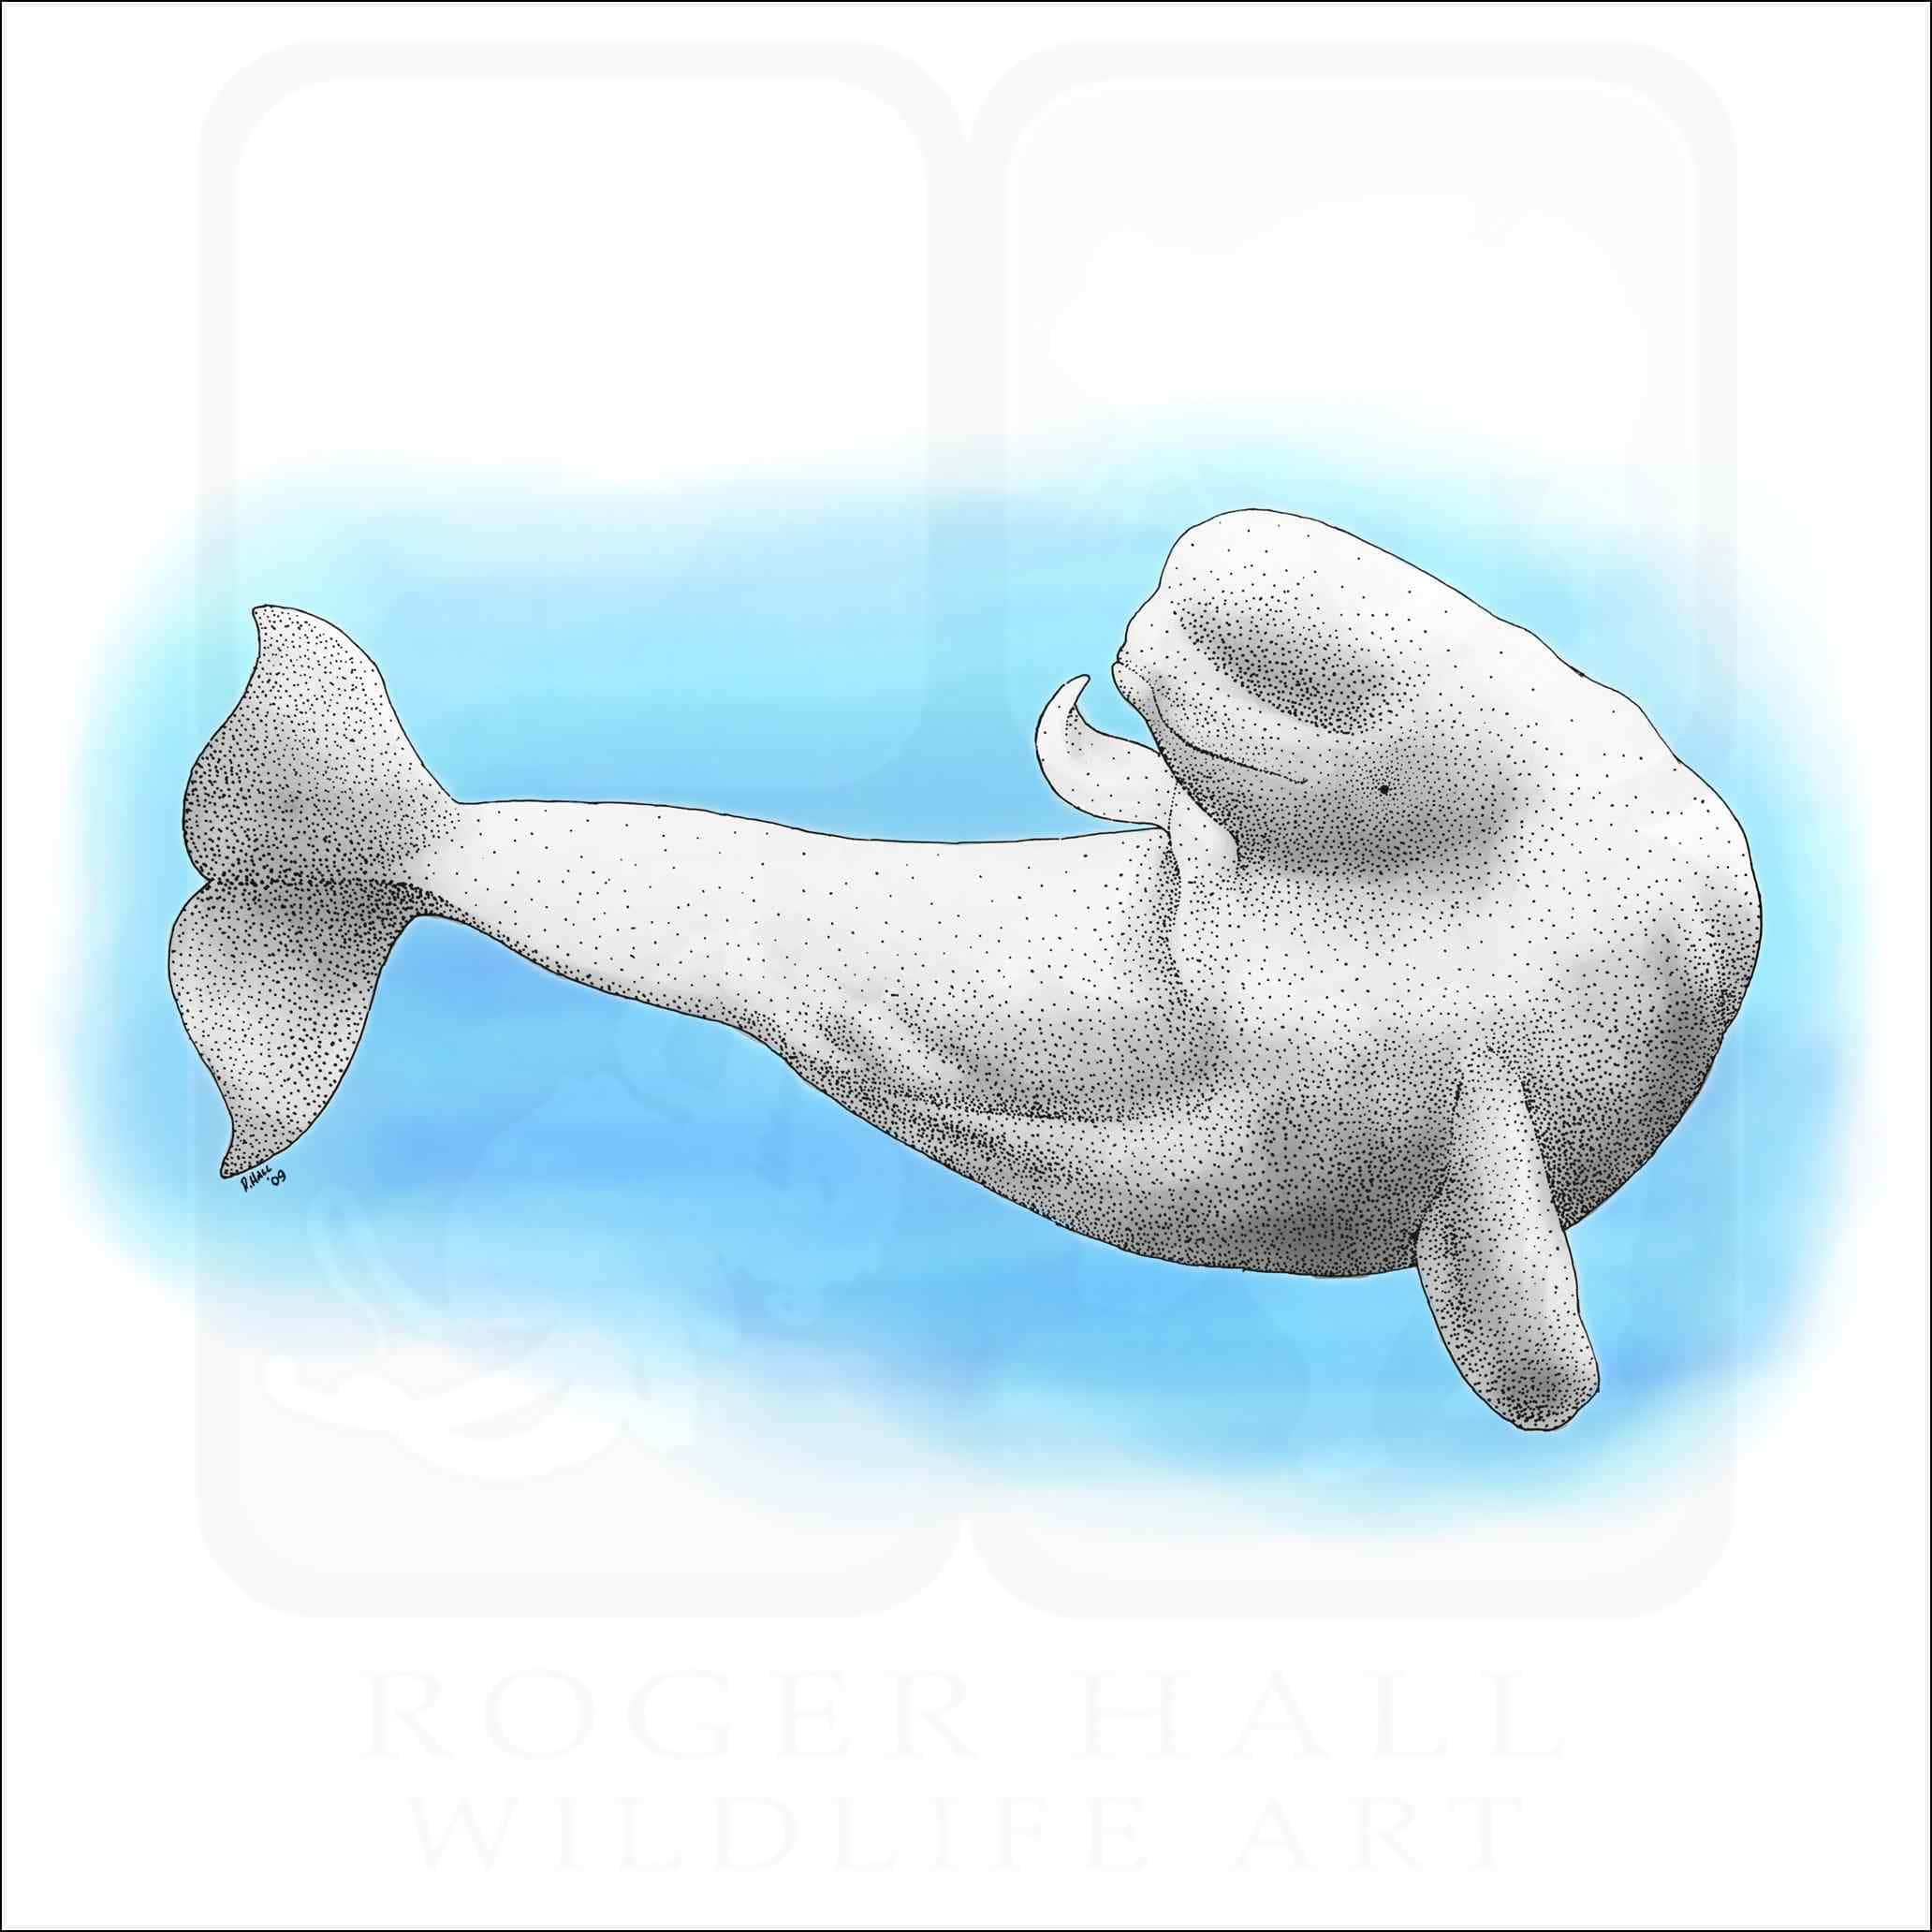 Caption: Graceful Beluga Whale Swimming In Crystal Clear Waters Wallpaper